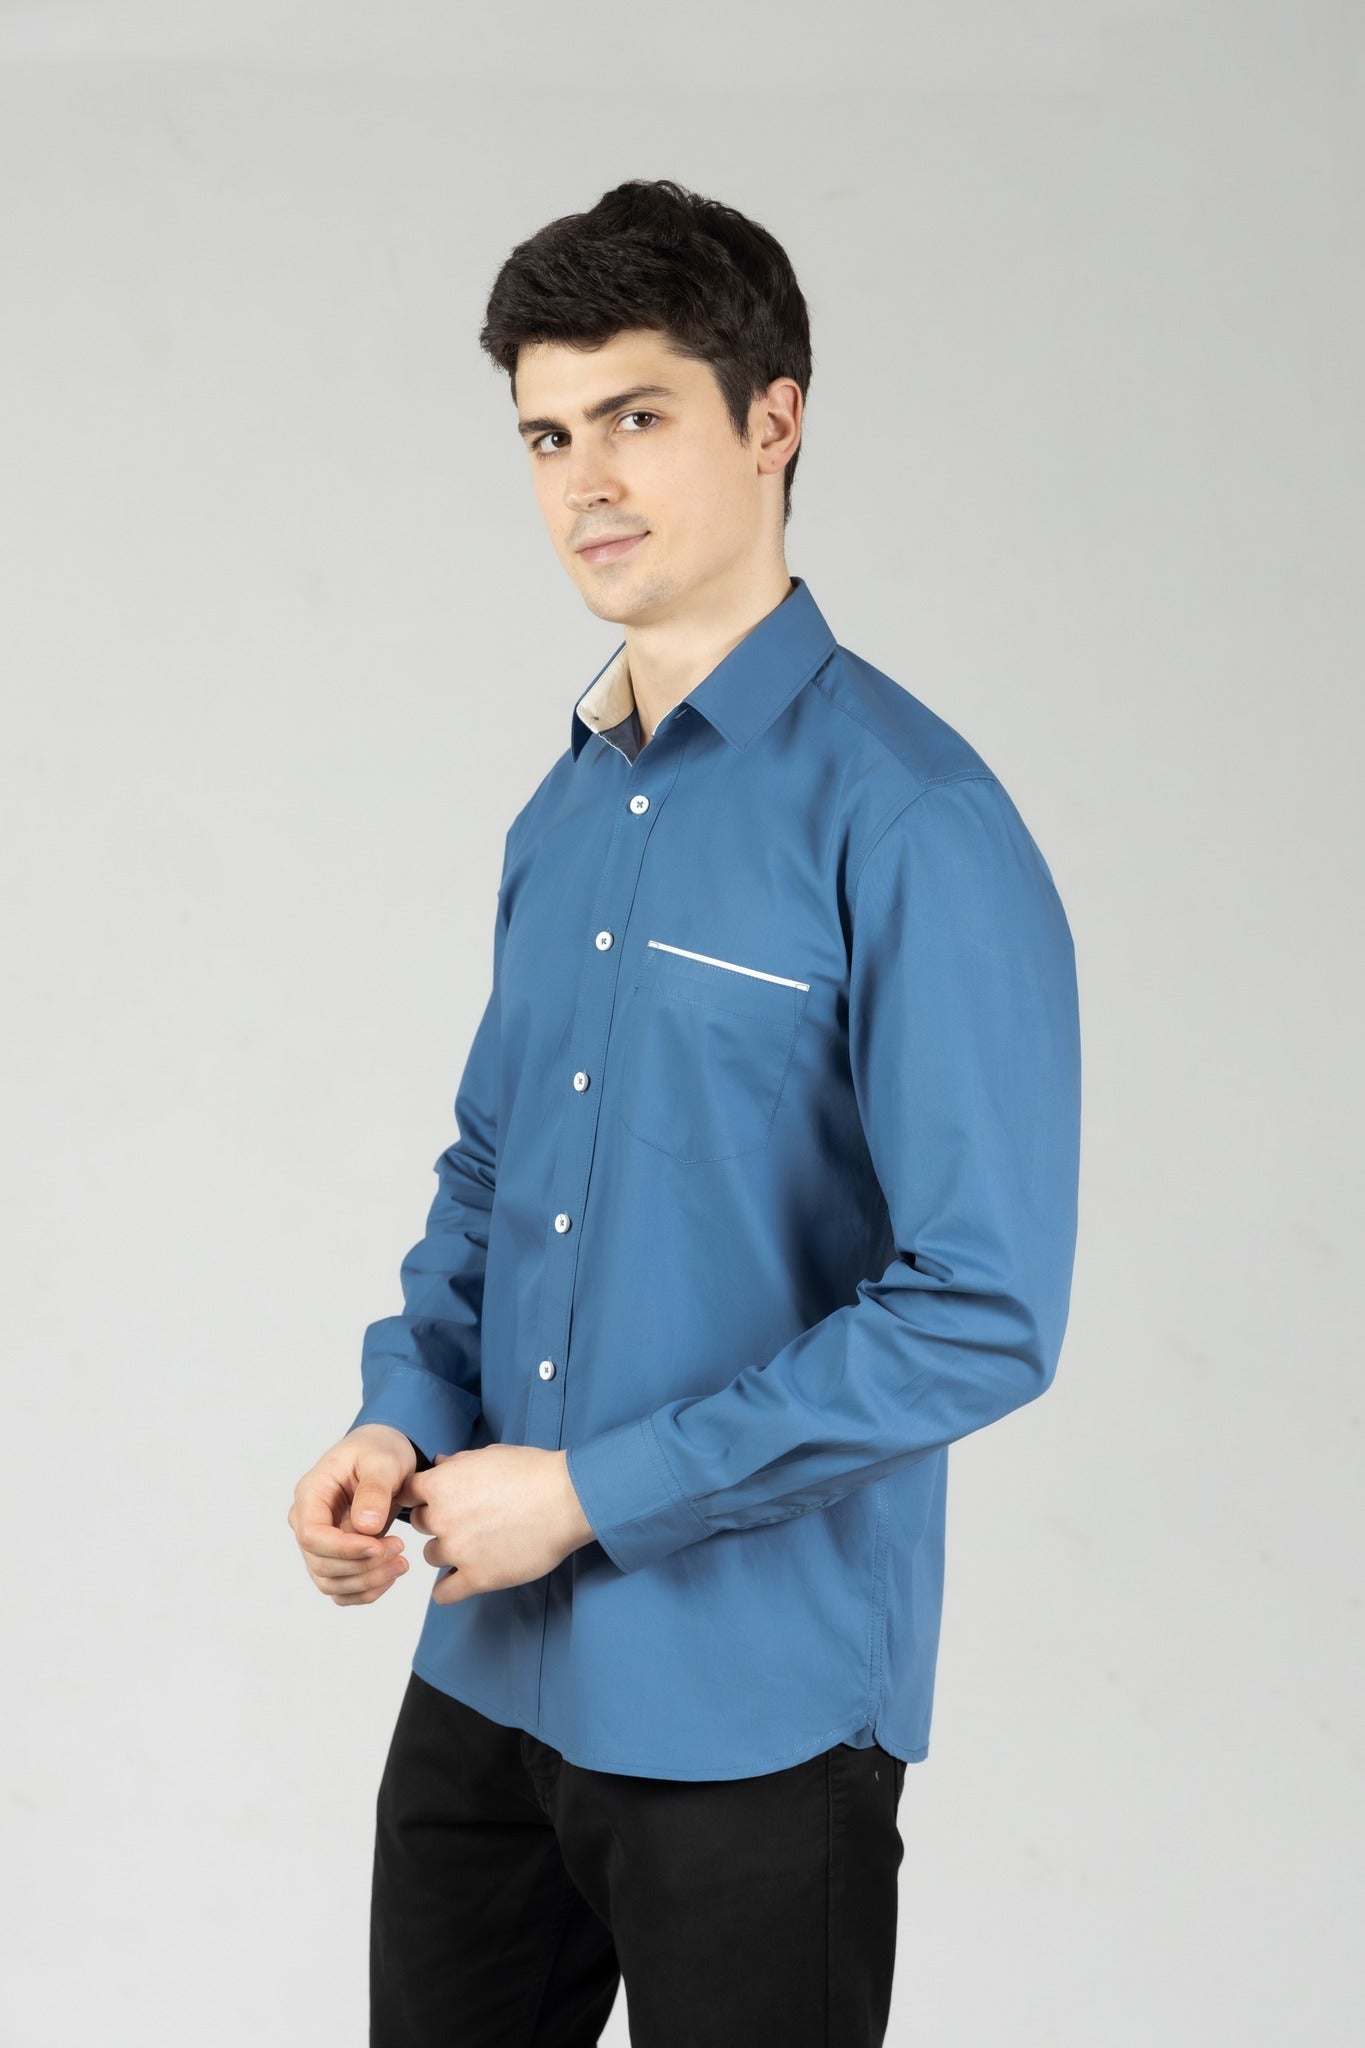 Ash Blue Contrast Men Shirt in Cotton with Full Sleeves & Single Pocket - OZMOD